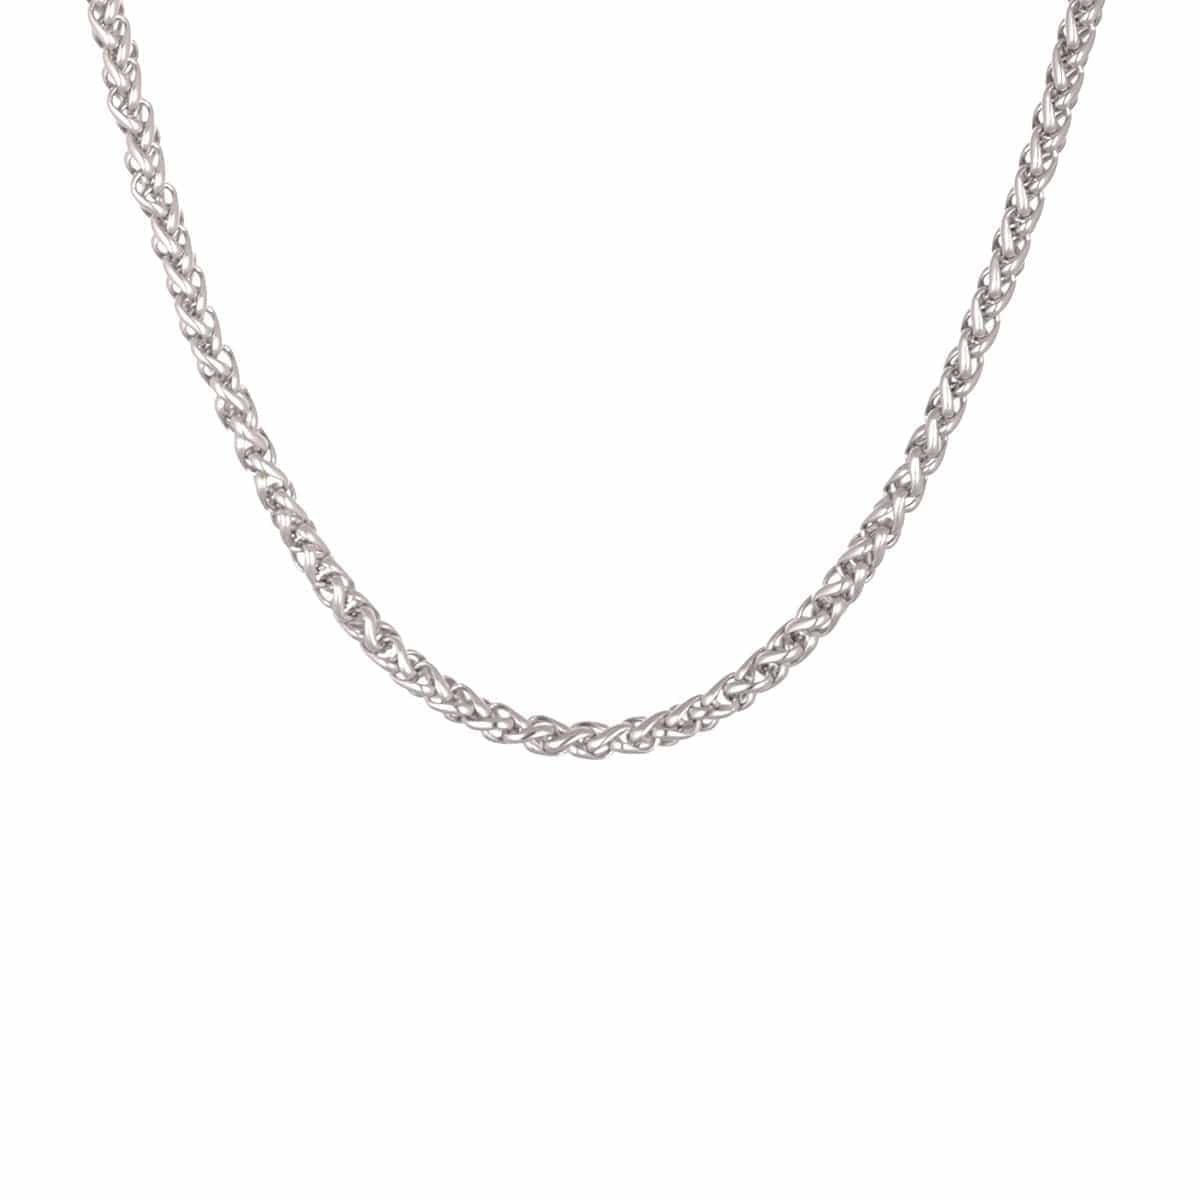 INOX JEWELRY Chains Silver Tone Stainless Steel Polished 3.5 mm Round Wheat Chain